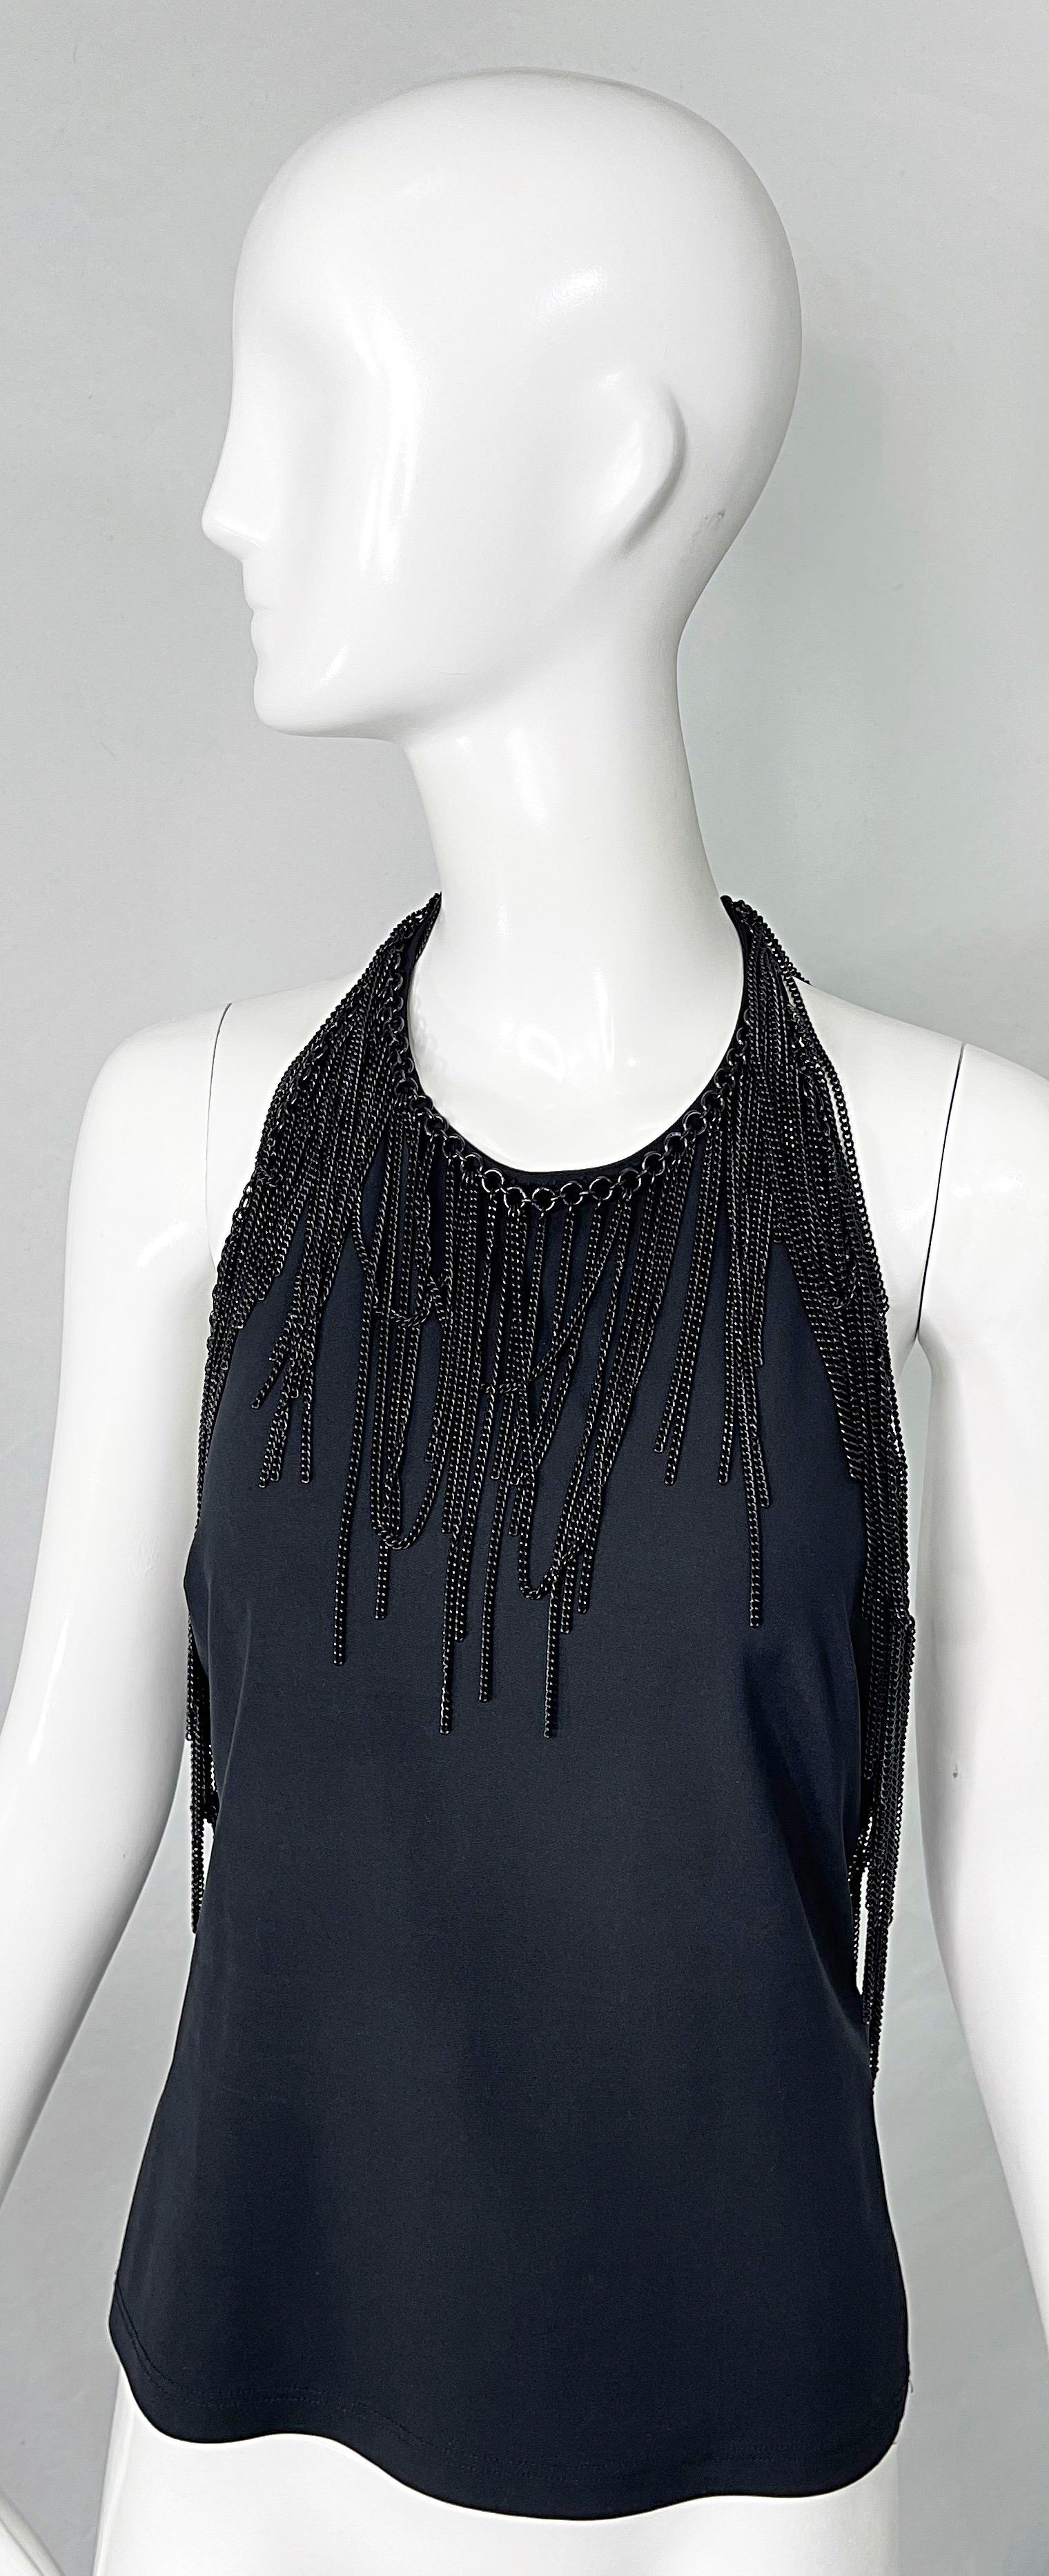 Gianni Versace 2000s Size 44 / 8 10 Black Chain Encrusted Y2K Halter Top Shirt  For Sale 10